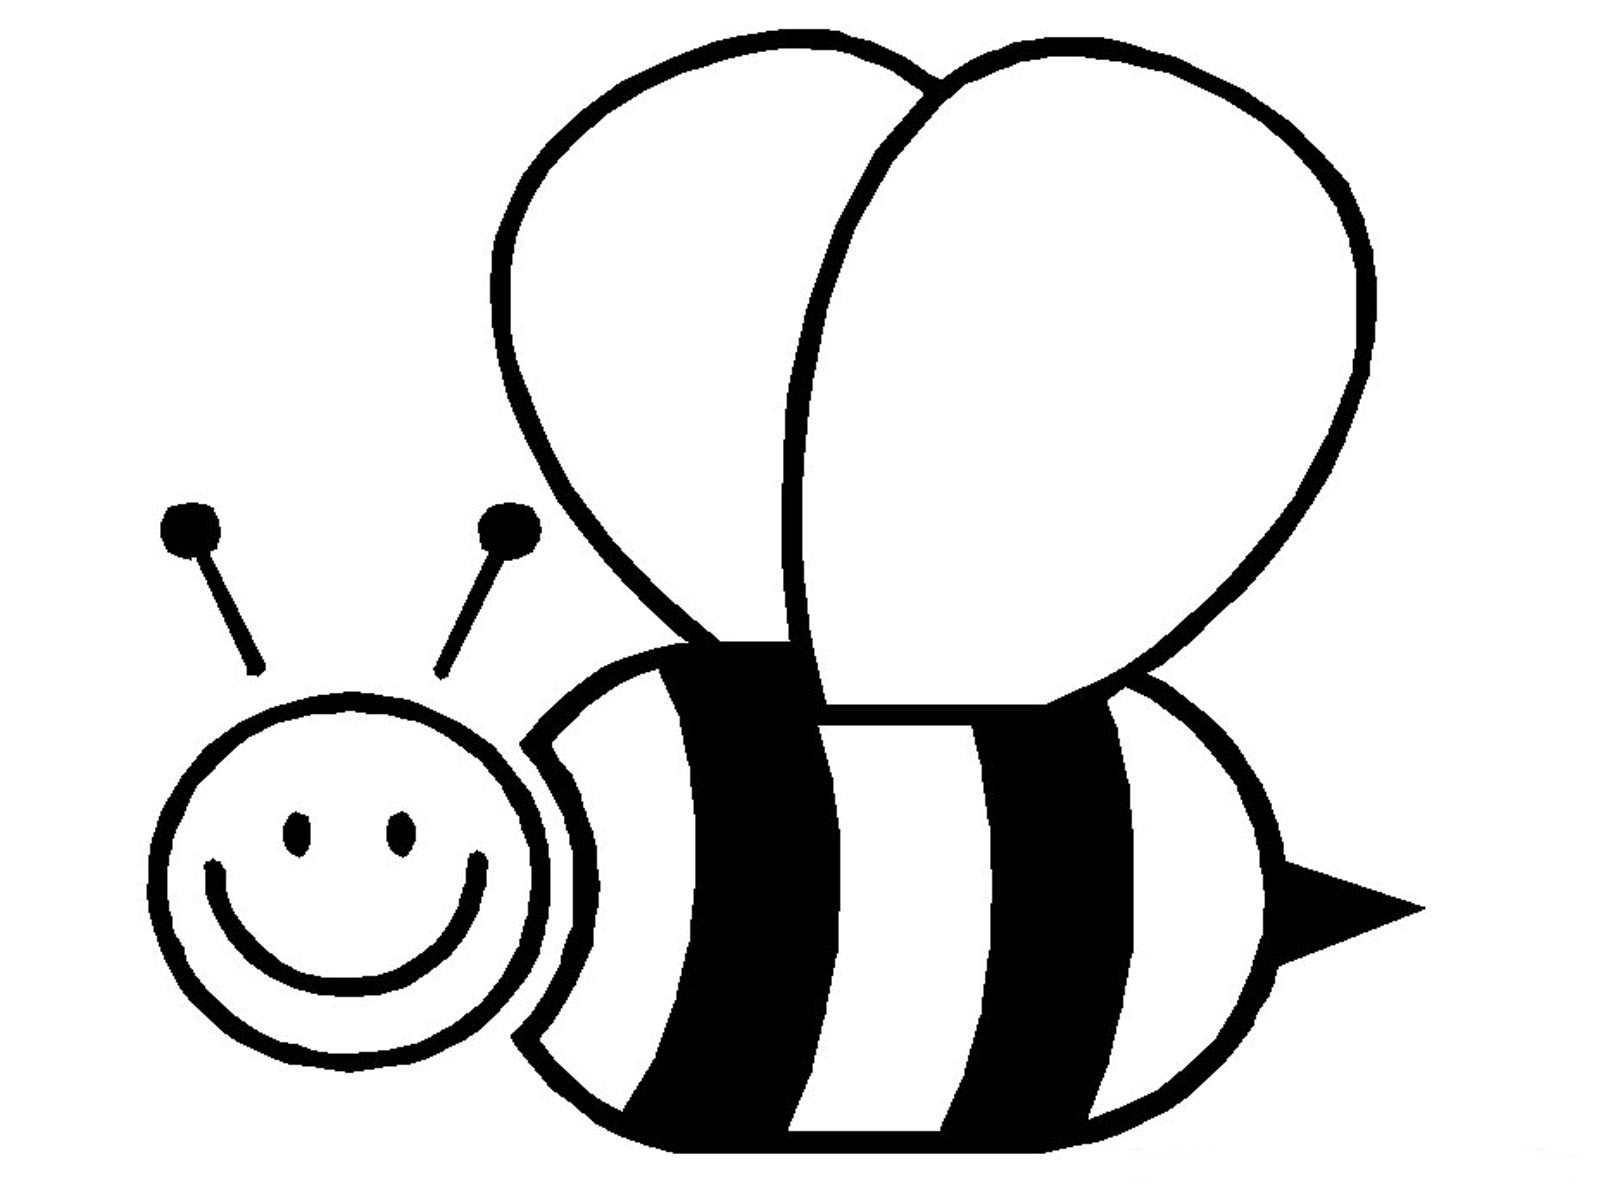 Bumble Bee Clip Art Coloring Page - ClipArt Best